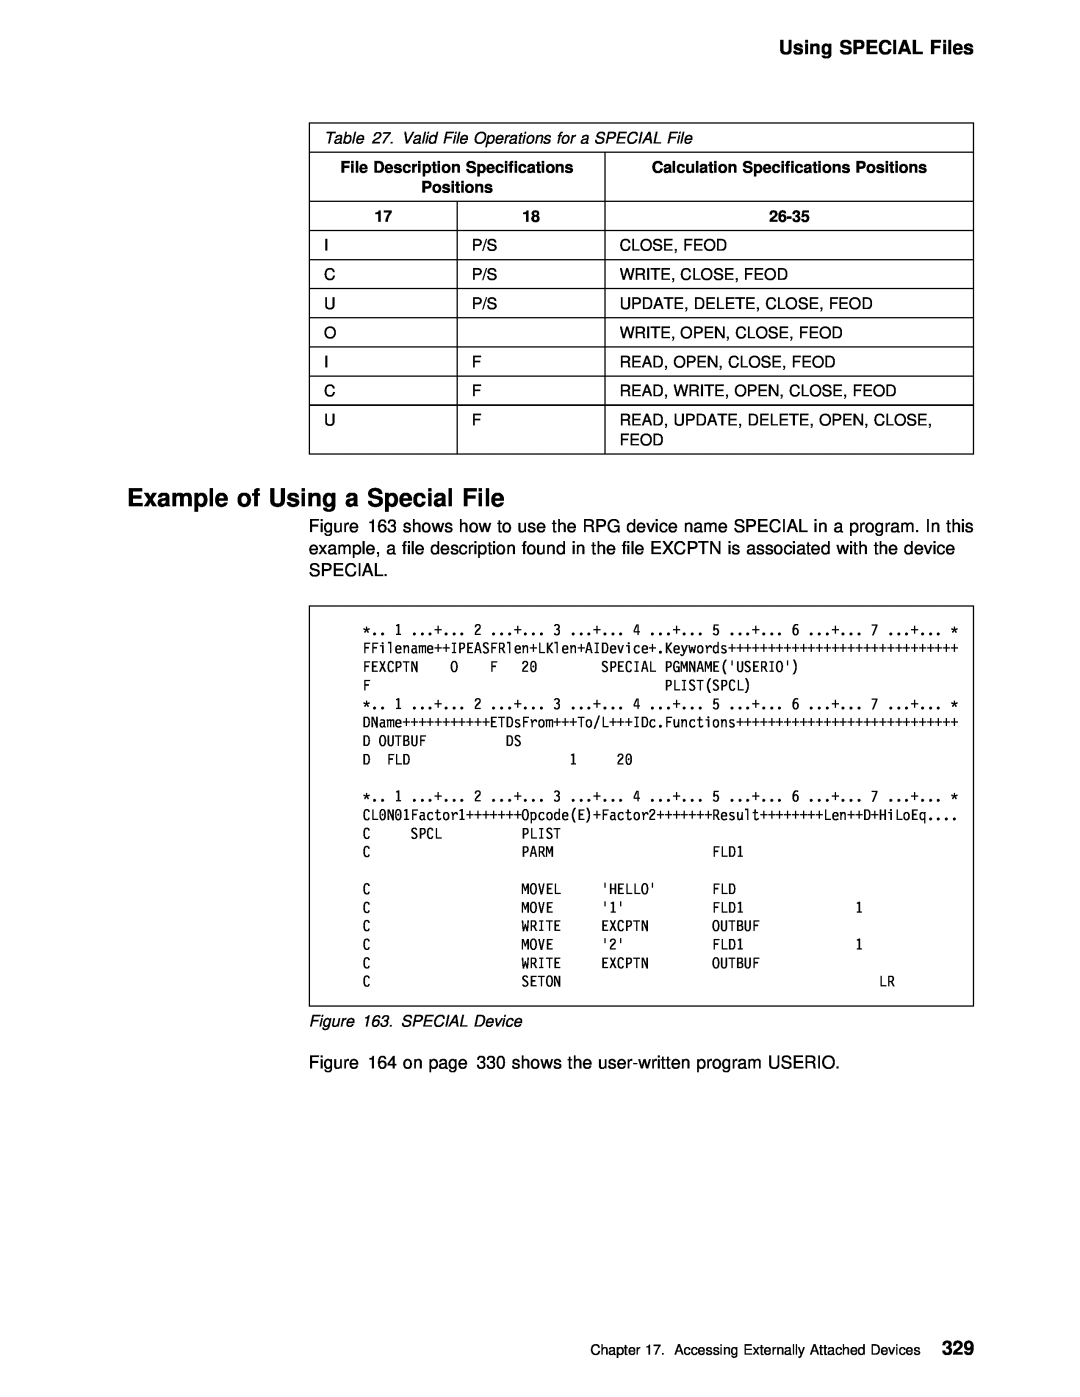 IBM AS/400 manual Example of Using a Special File, SPECIAL Files, Specifications, Positions, 26-35 